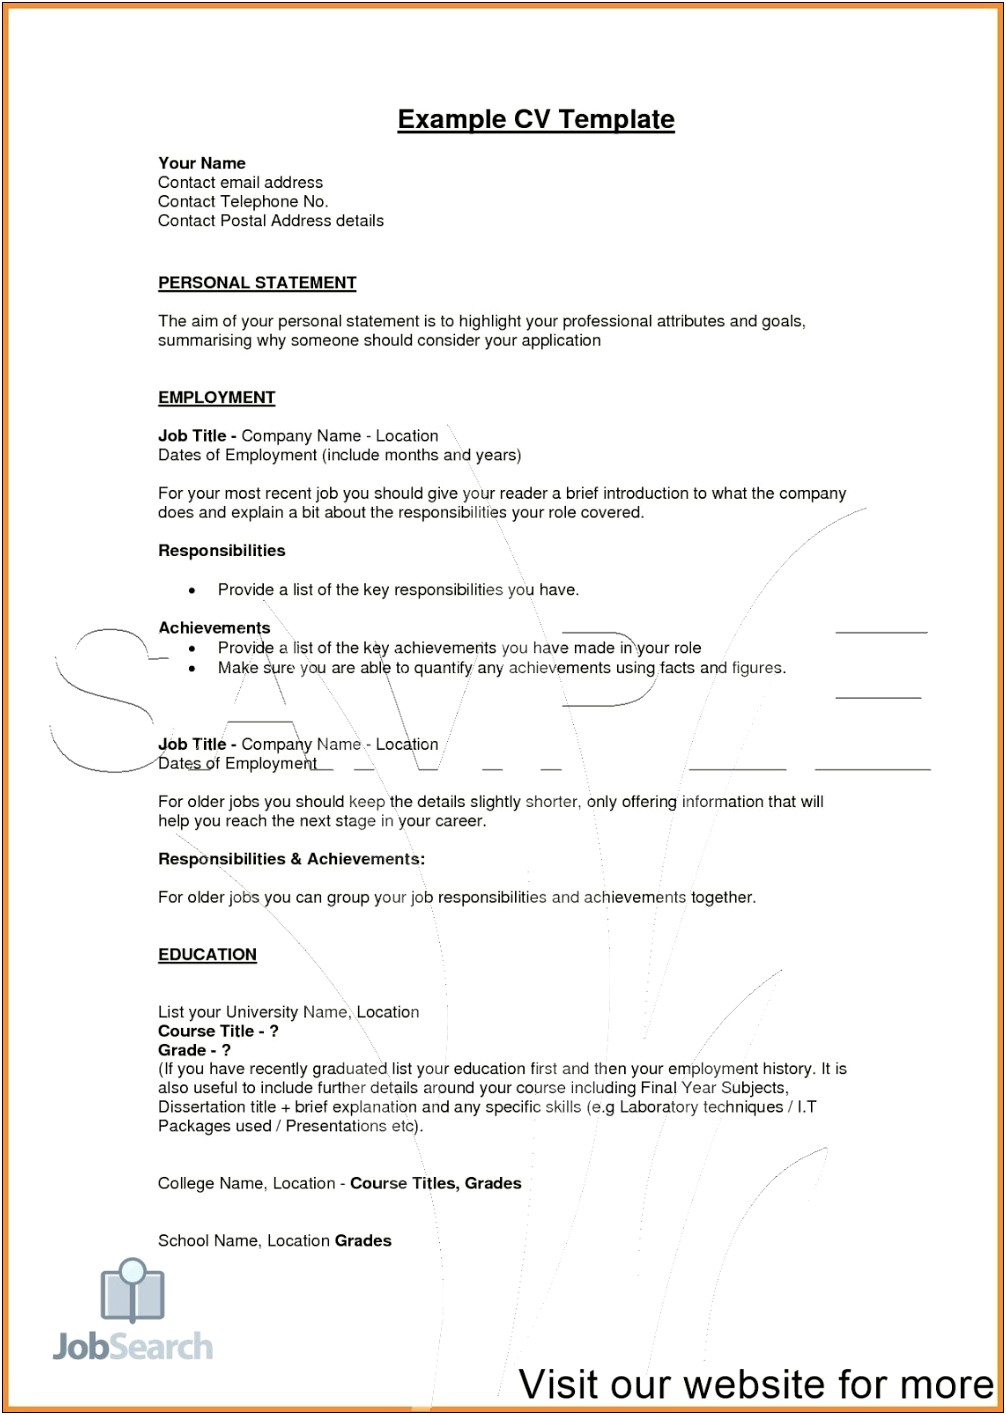 Apply For Jobs Resume As A Pdf